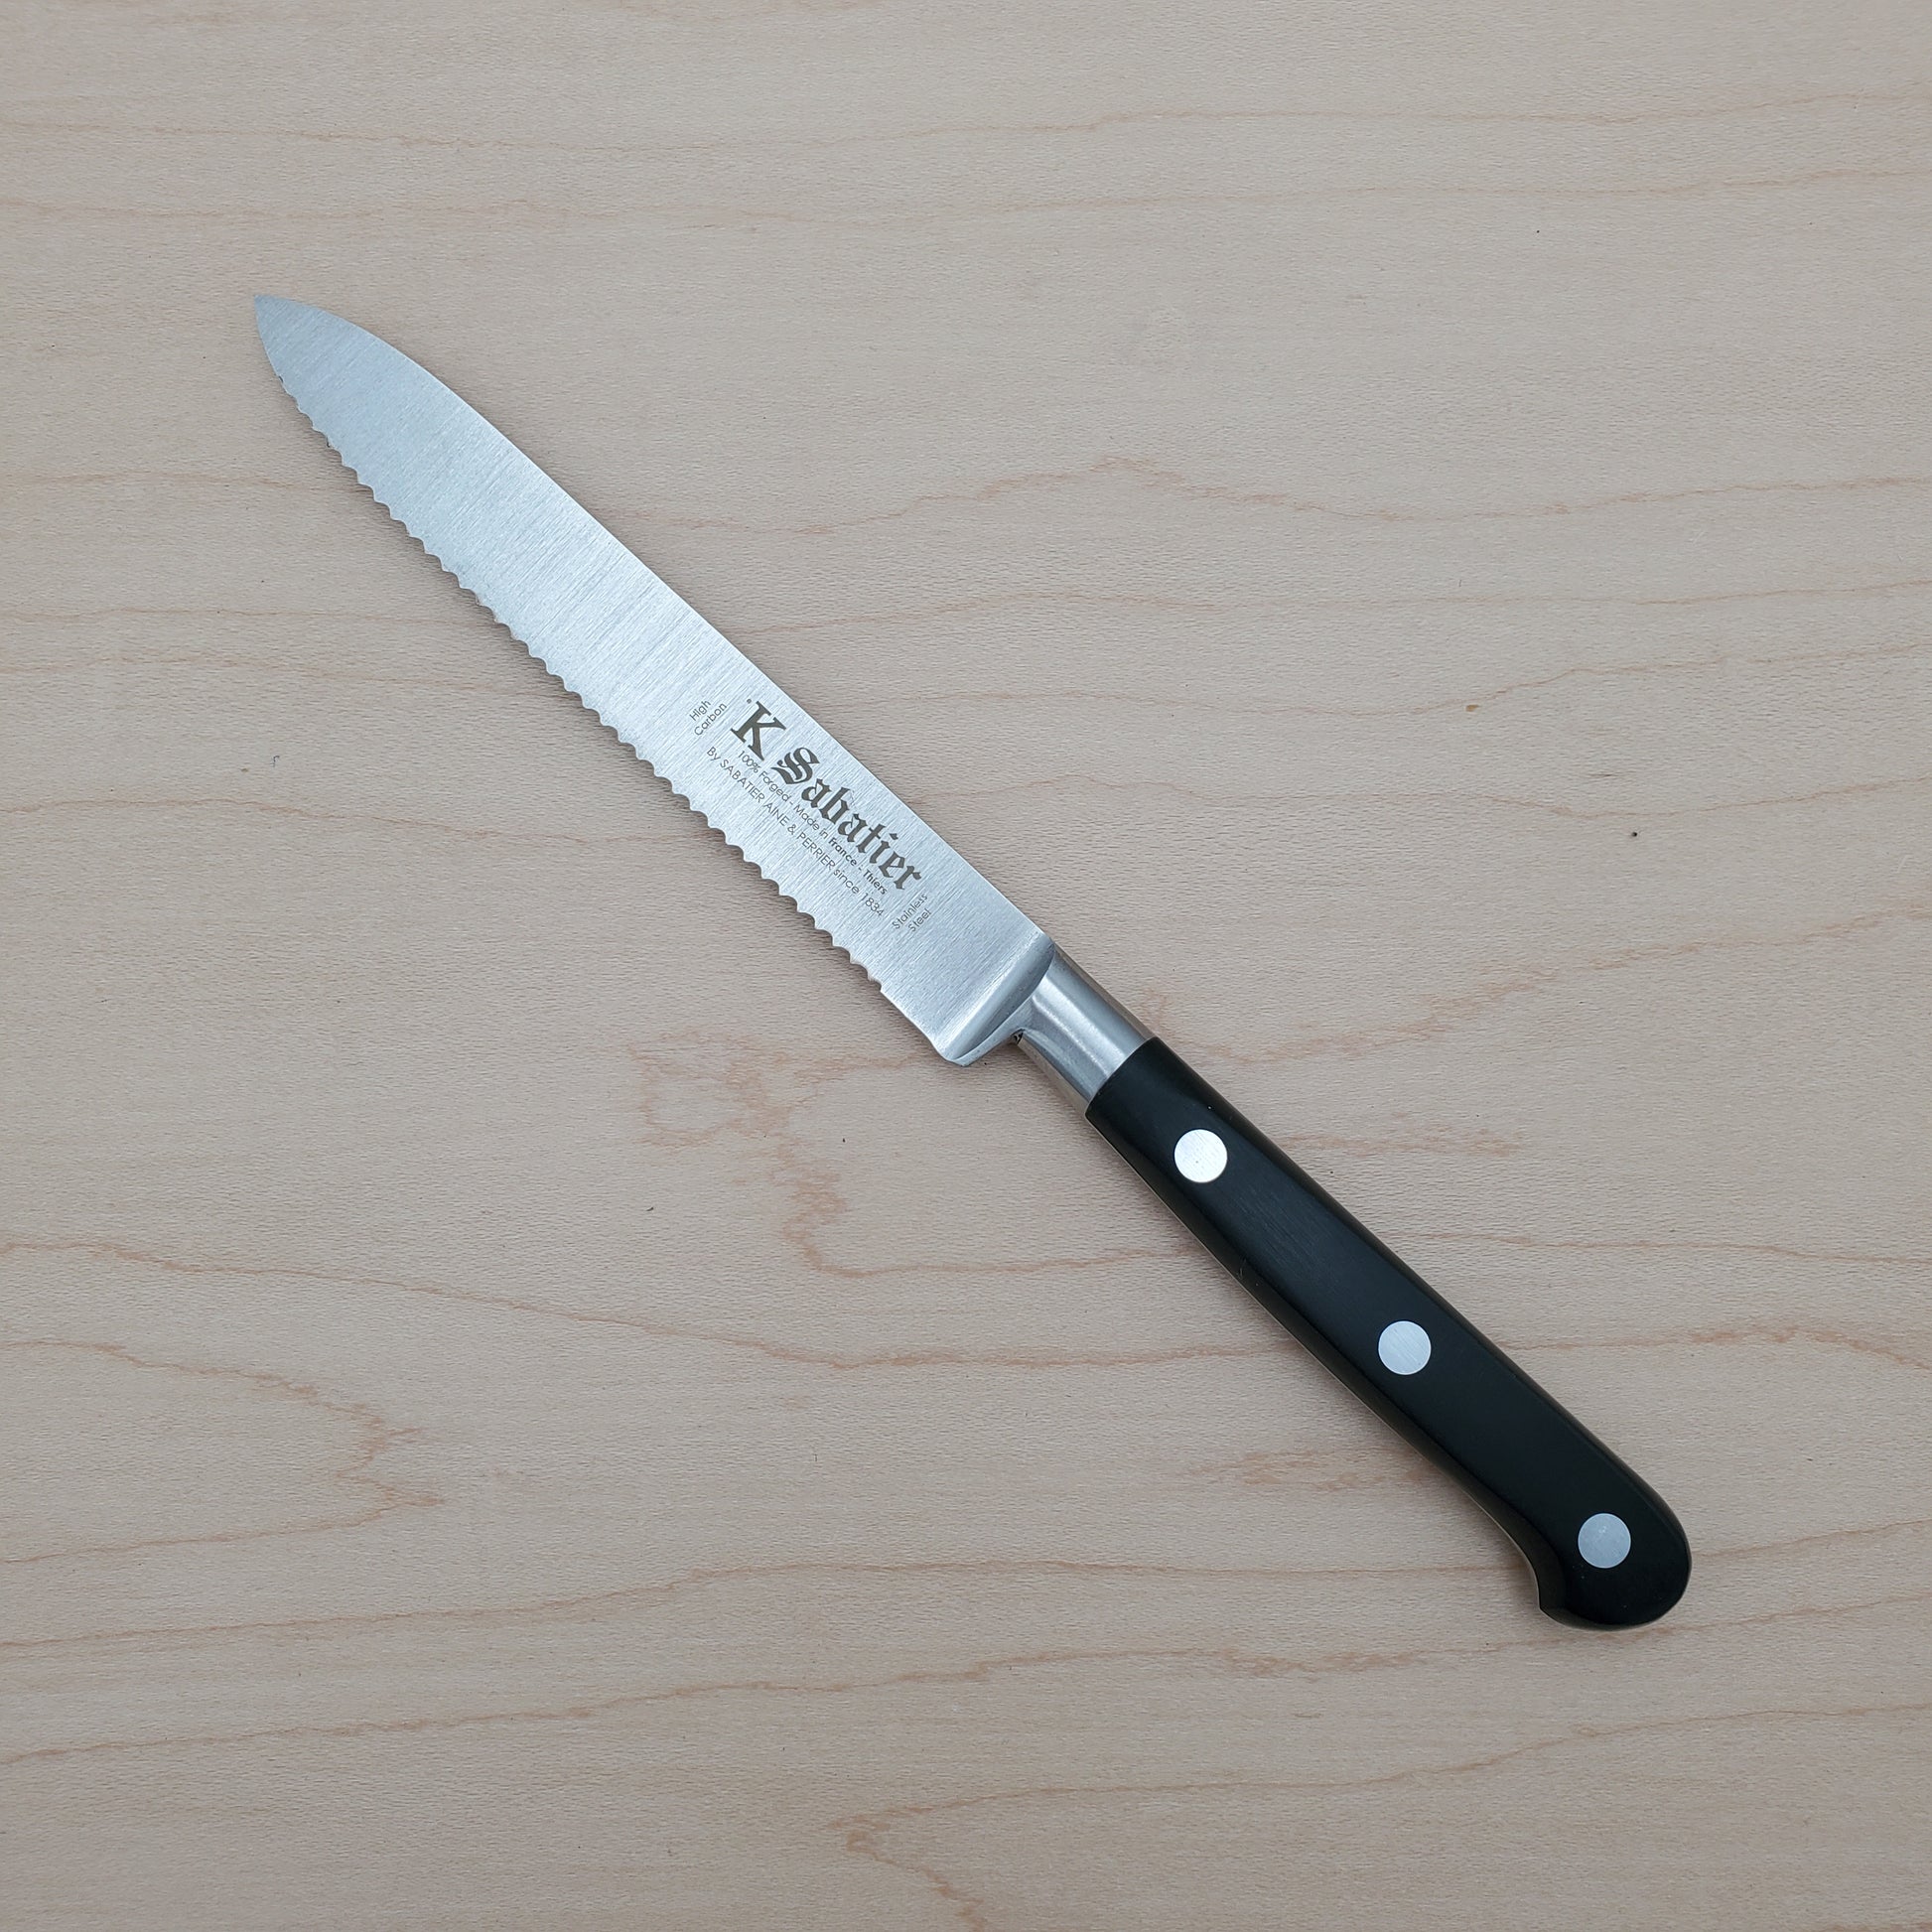 K Sabatier 5 Serrated Utility Tomato Authentique Stainless